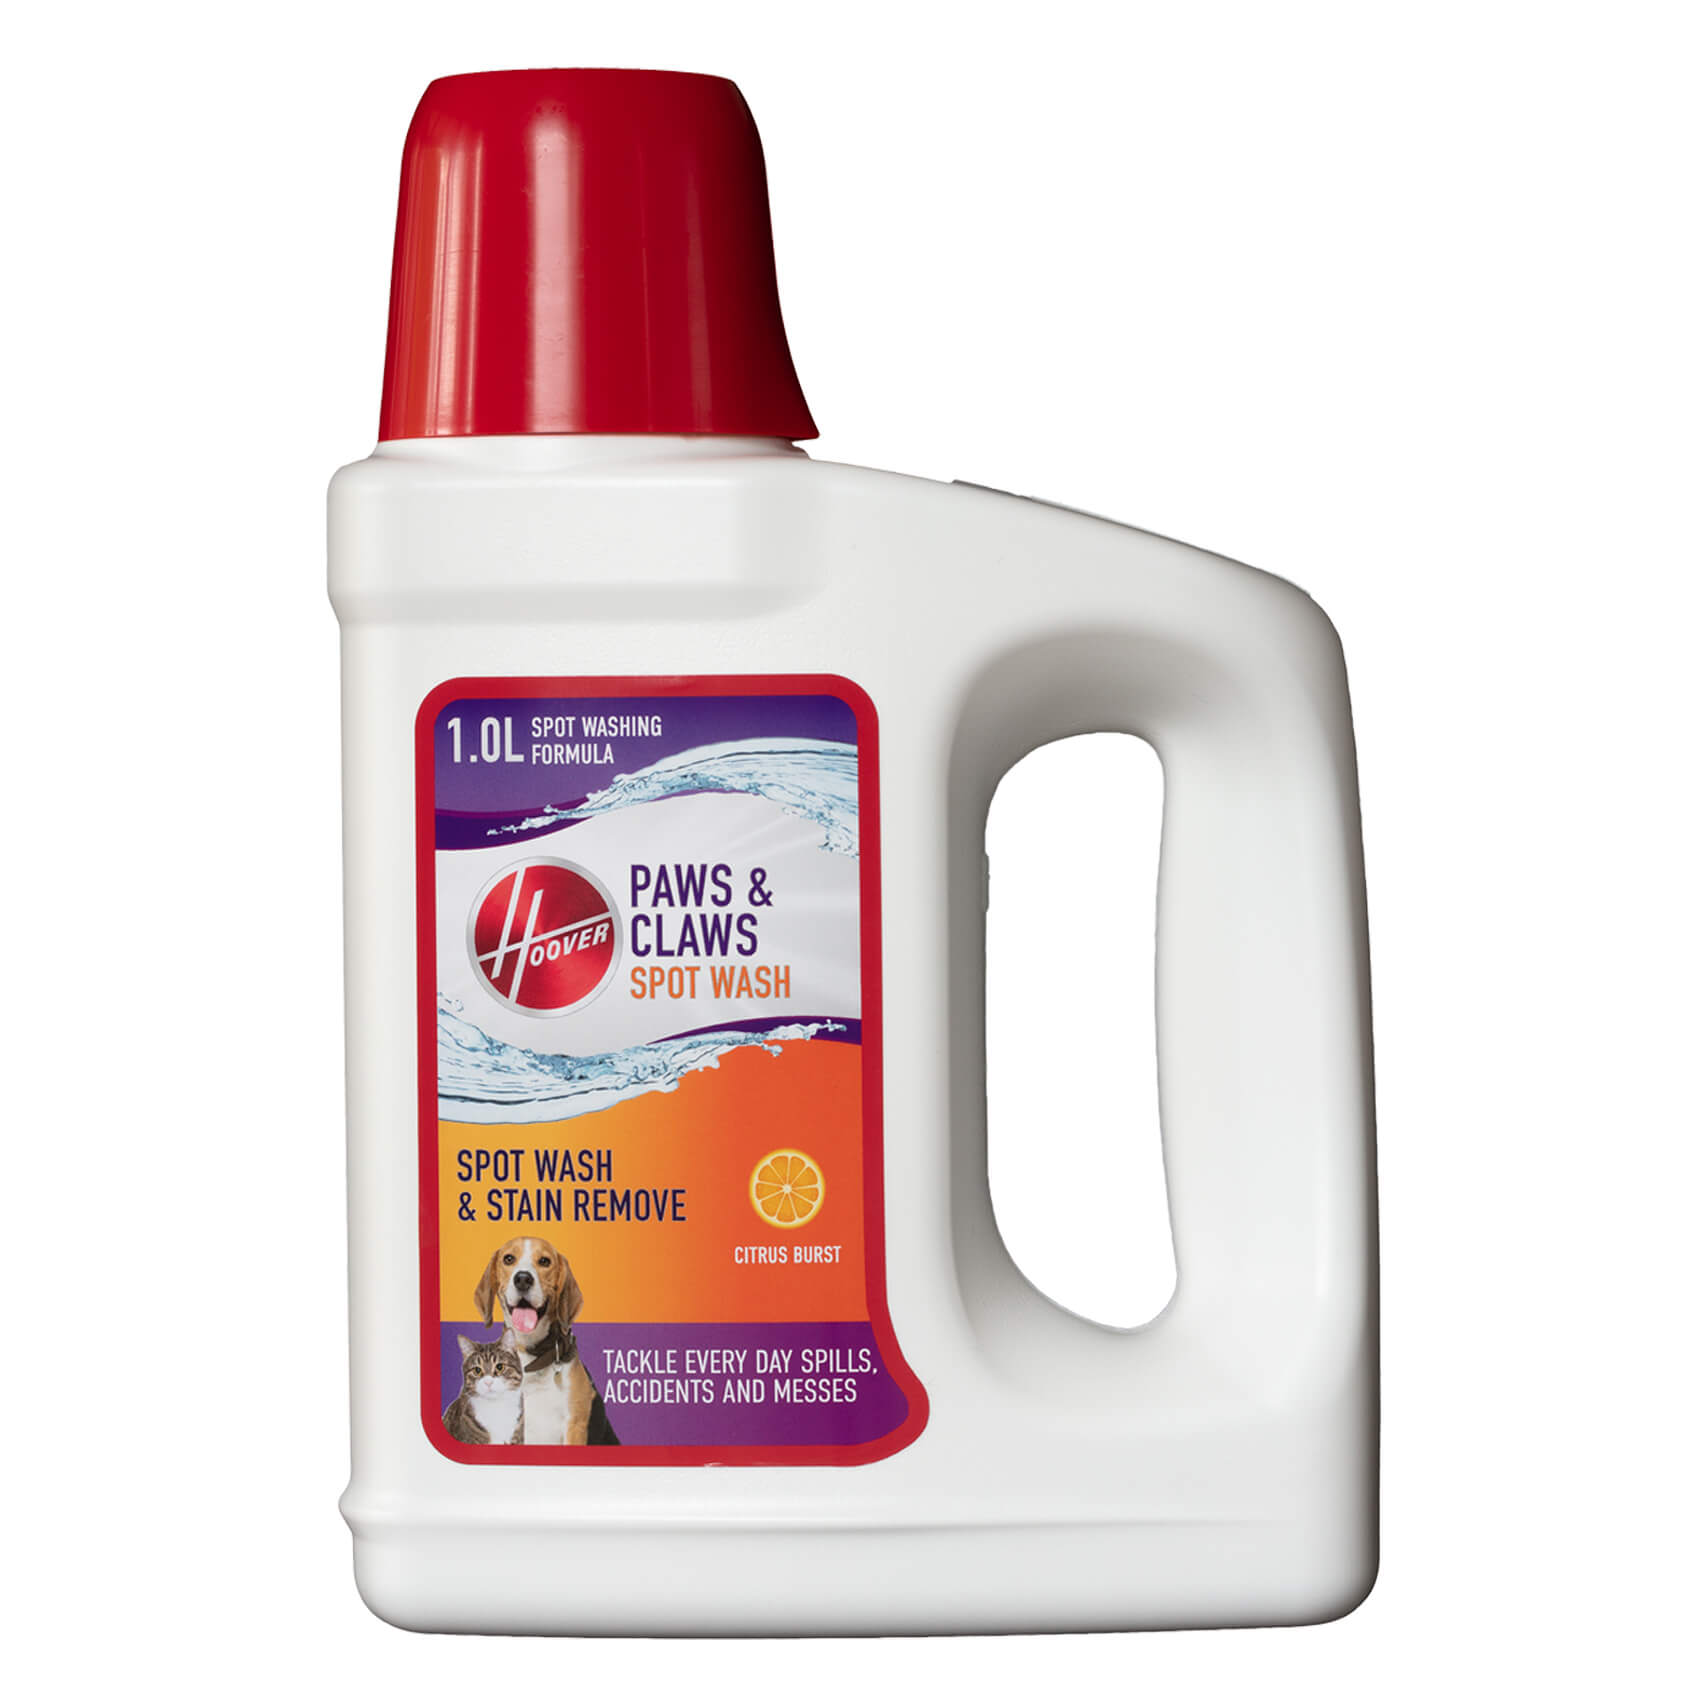 Hoover Paws & Claws Spot Wash Solution. 1L